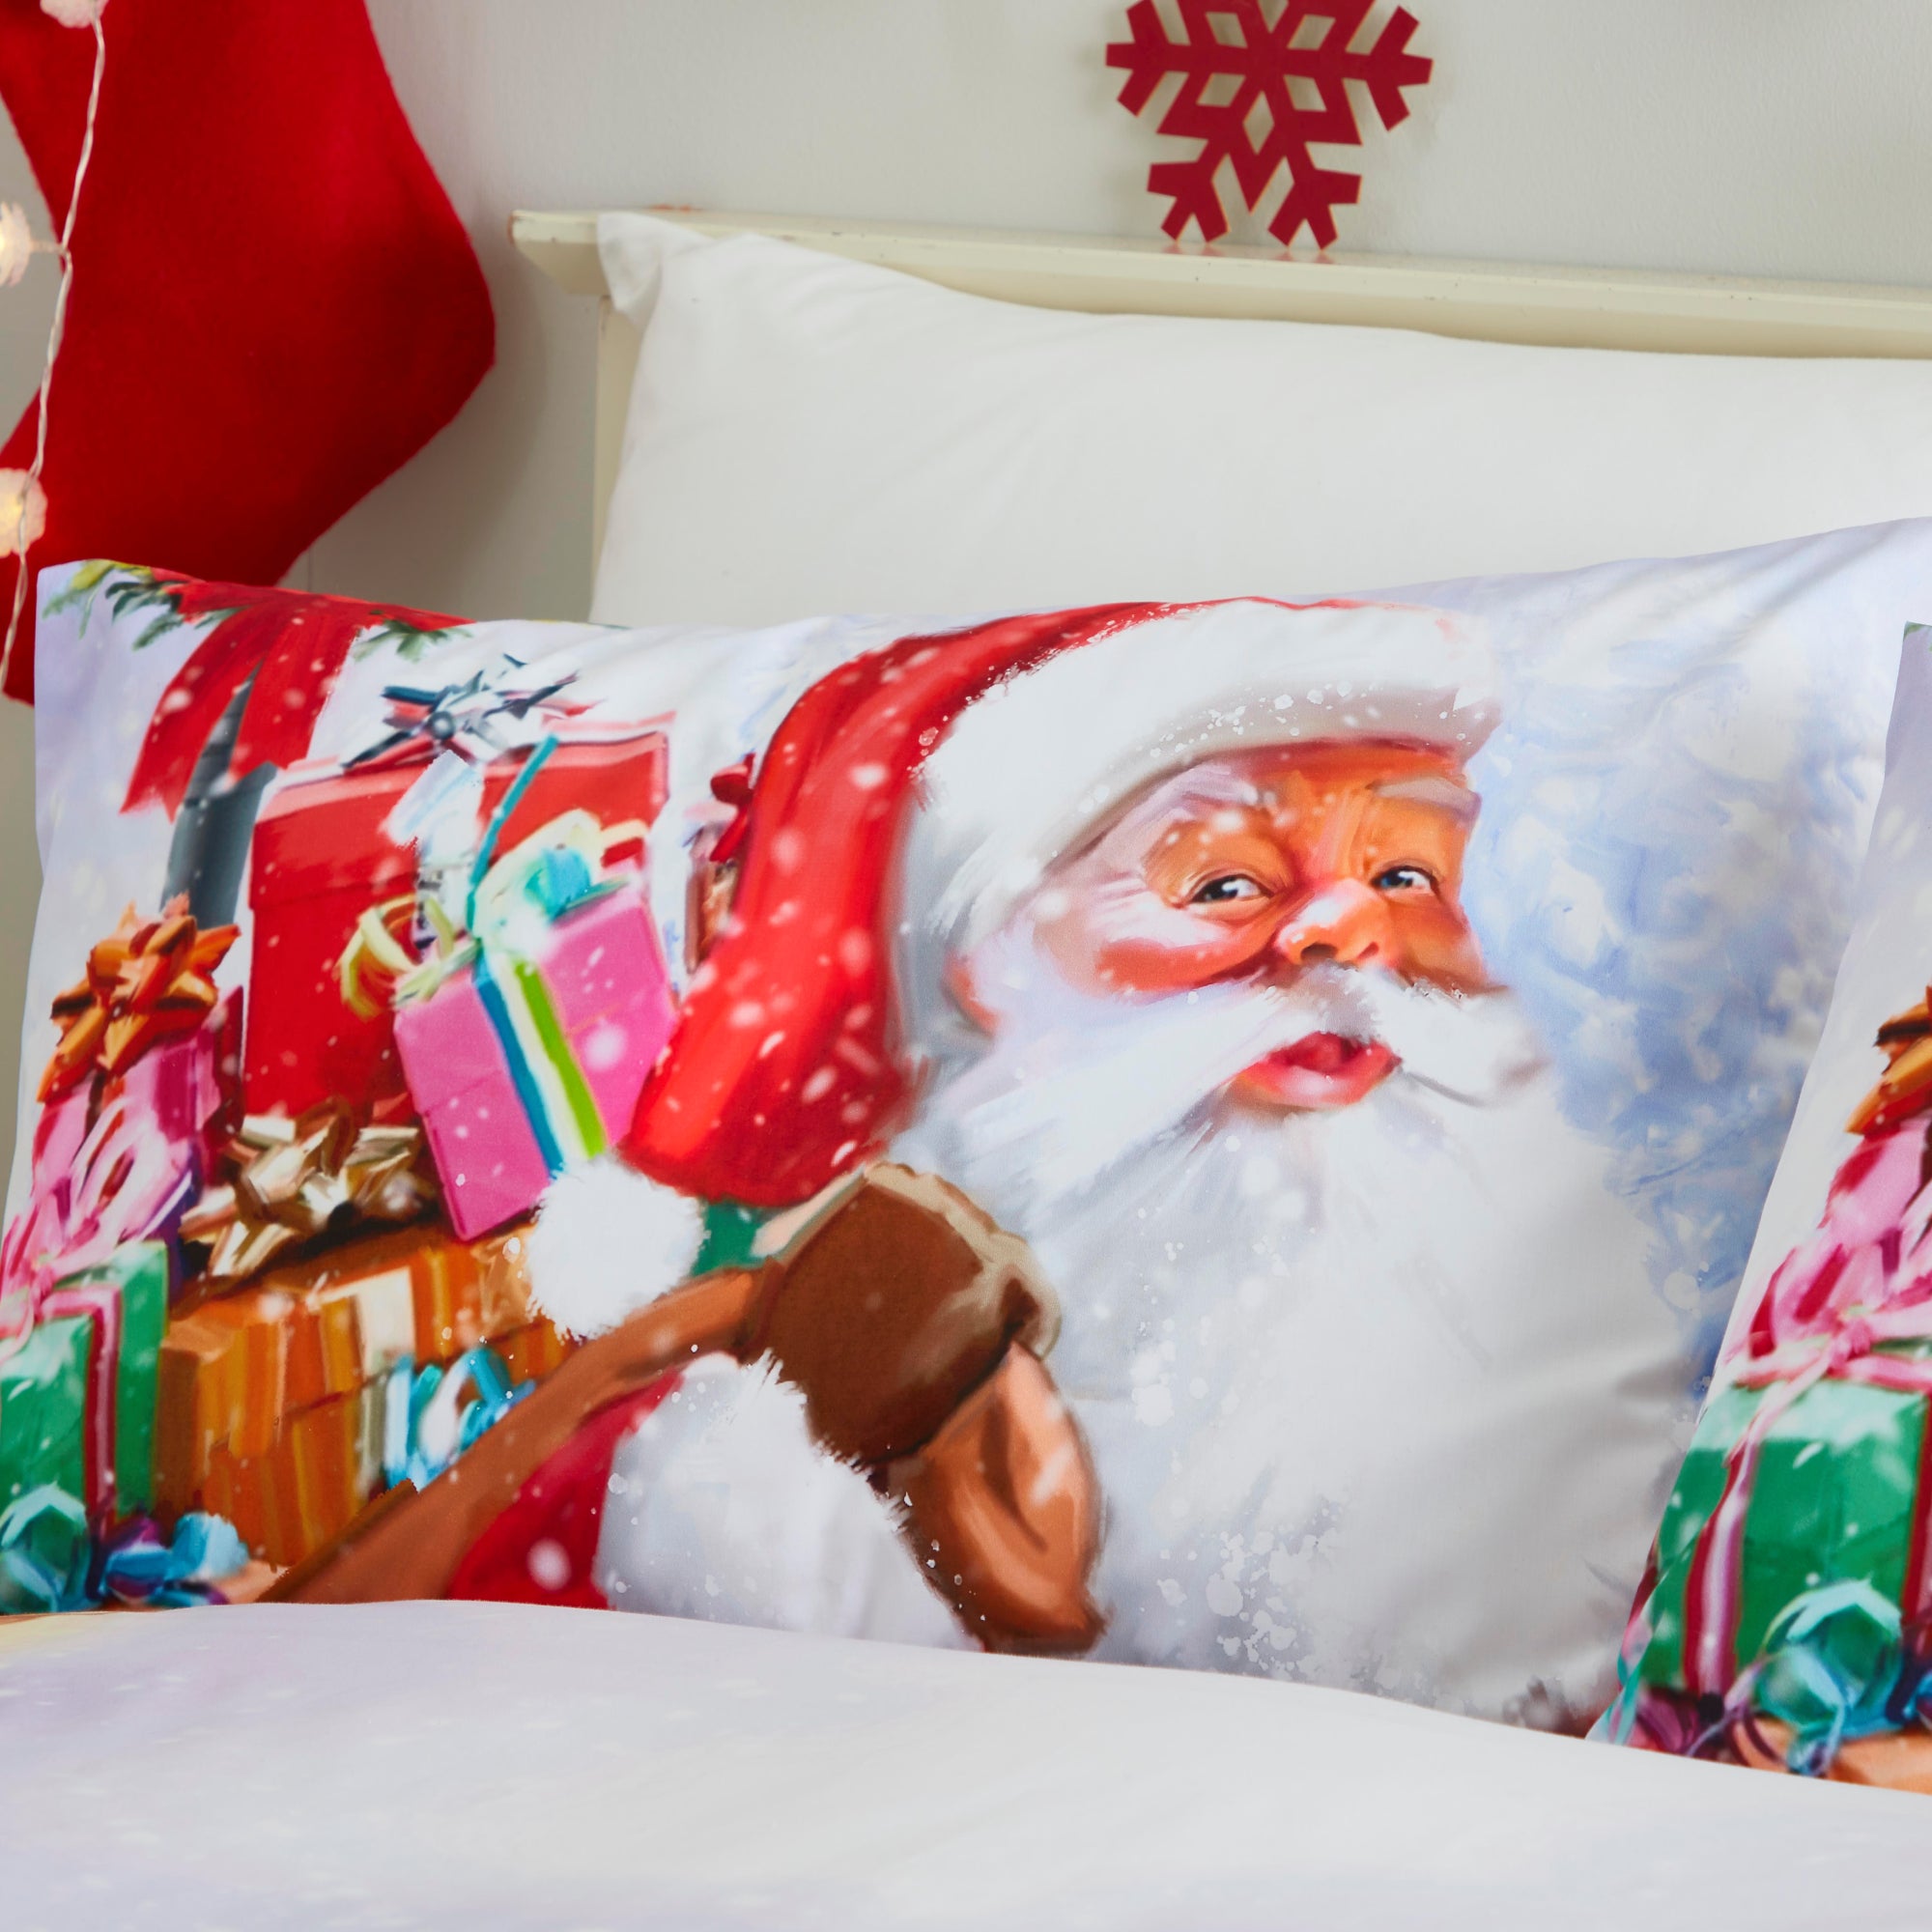 Duvet Cover Set Santa & Snowy by Fusion Christmas in Multi